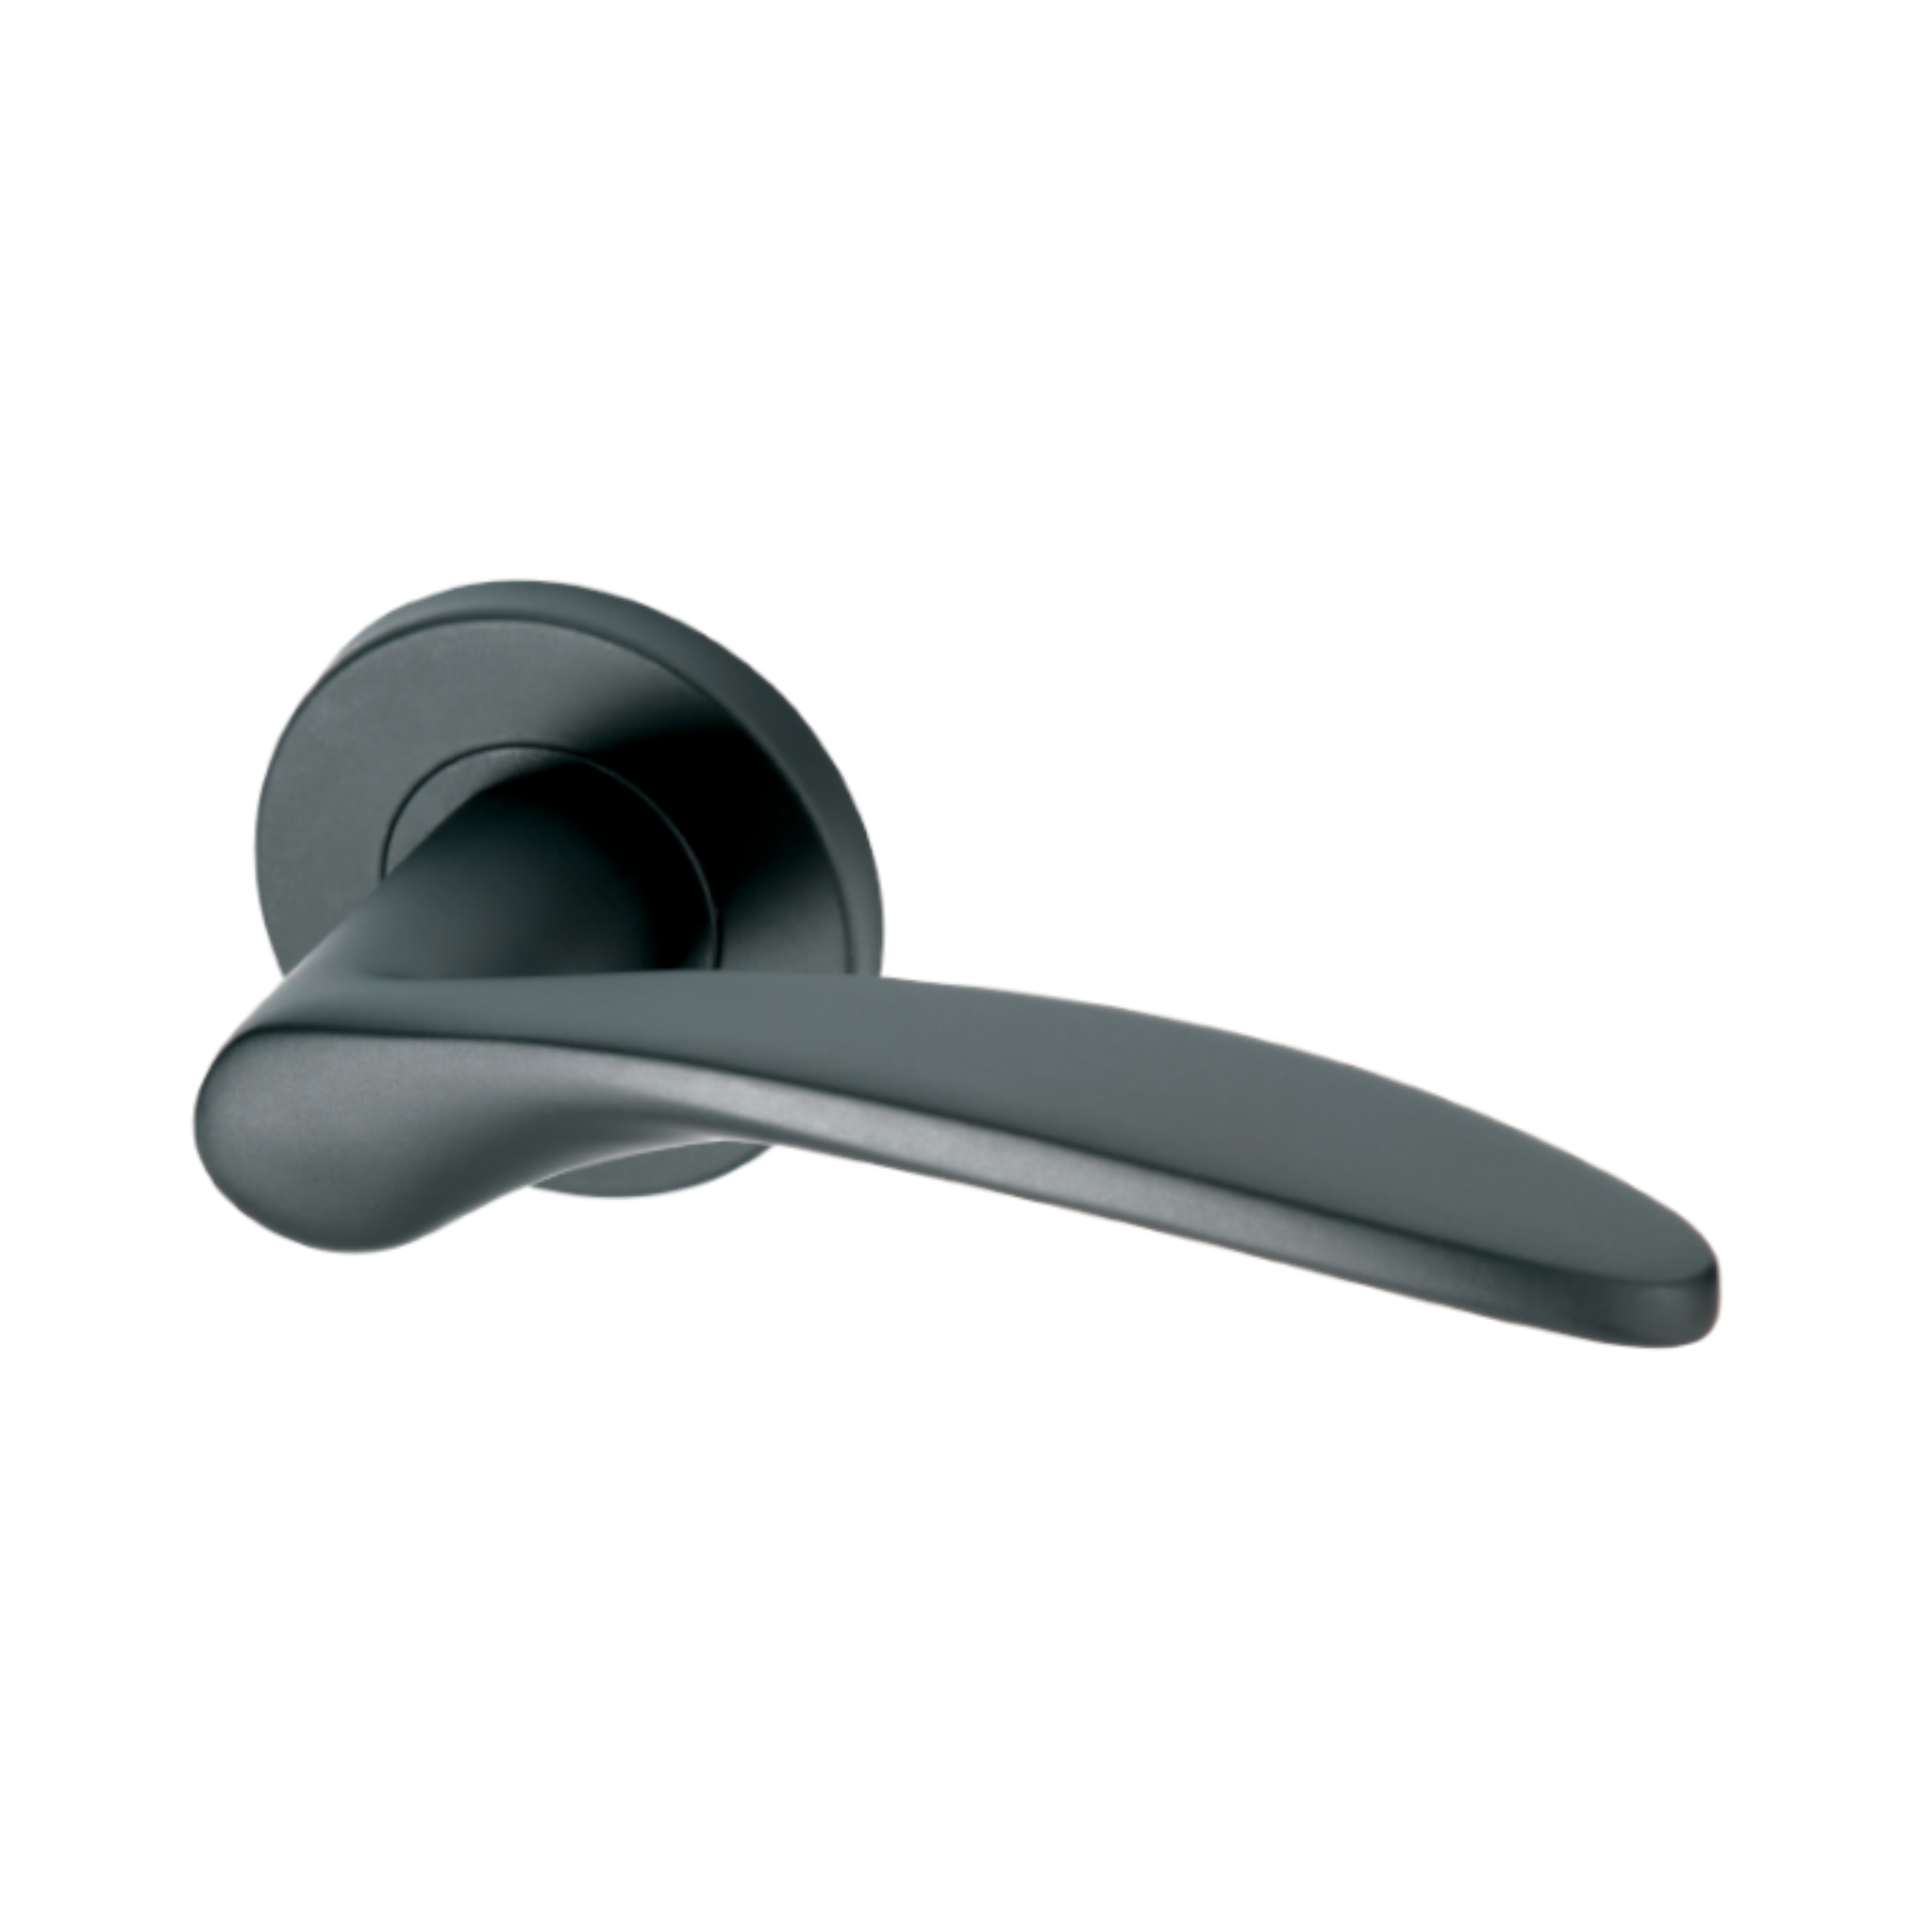 Molo Black, Lever Handle, Mork Range Solid, On Round Rose, With Escutcheons, Black Stainless Steel, QS